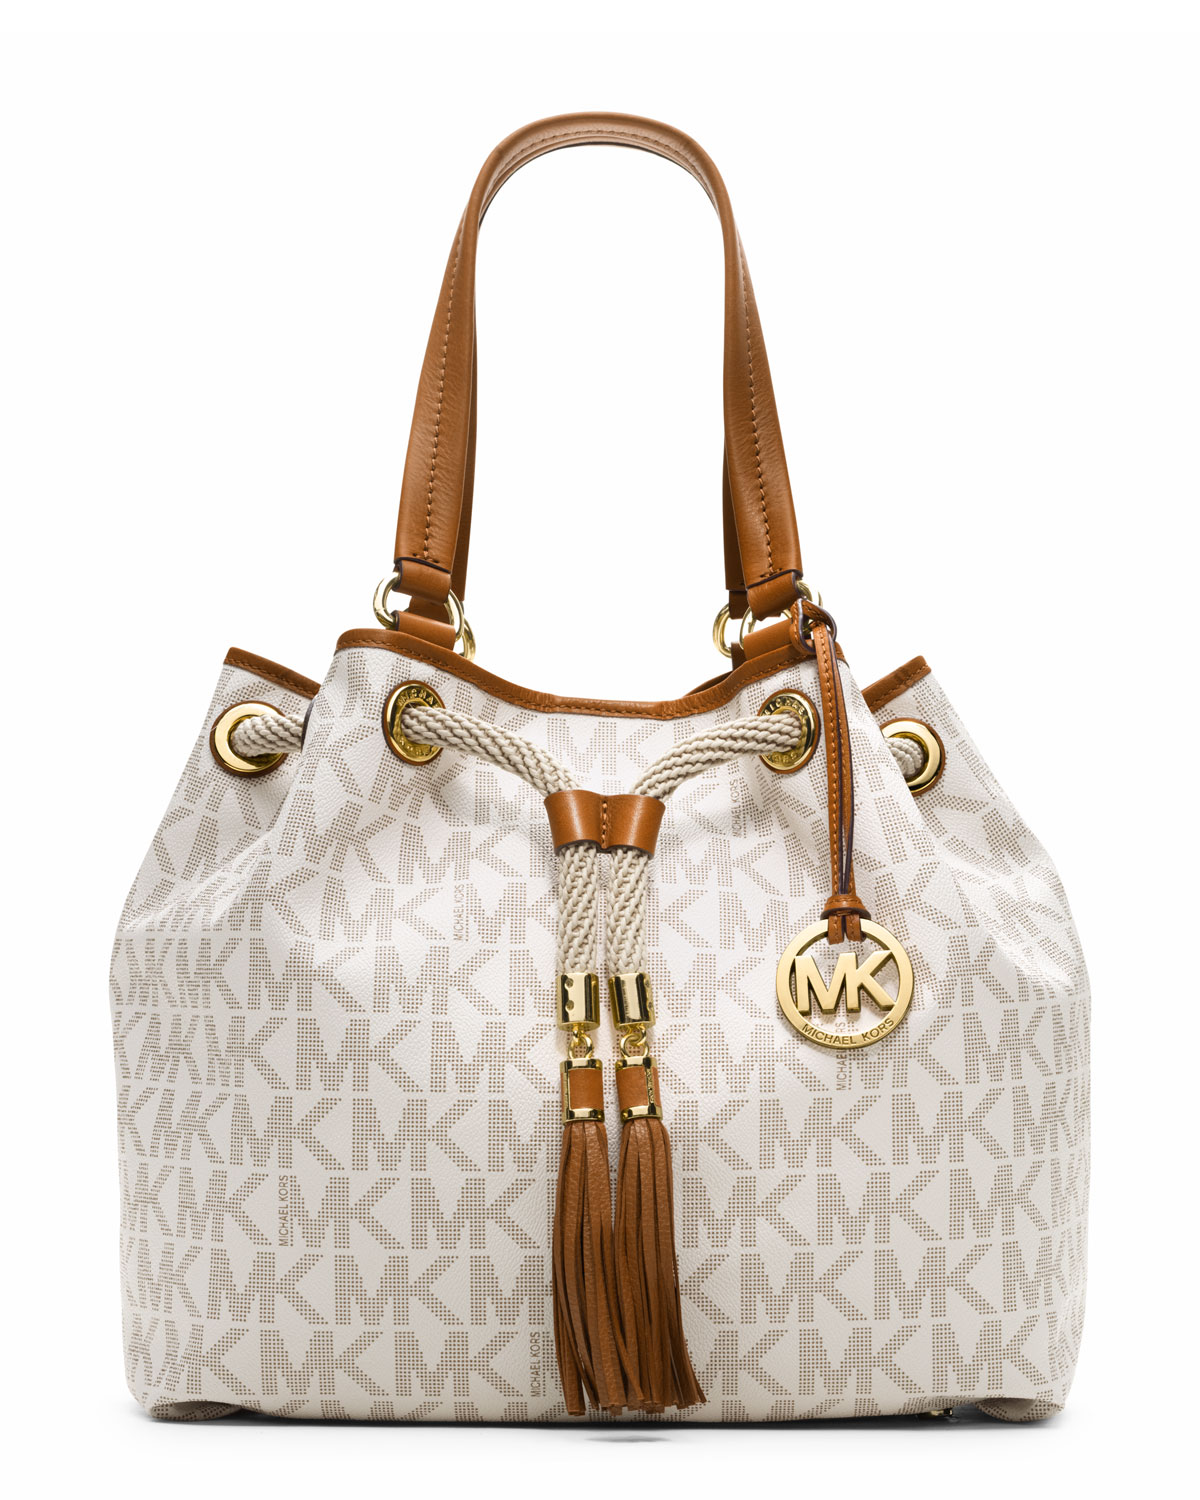 Lyst - Michael Michael Kors Large Marina Gathered Tote in White